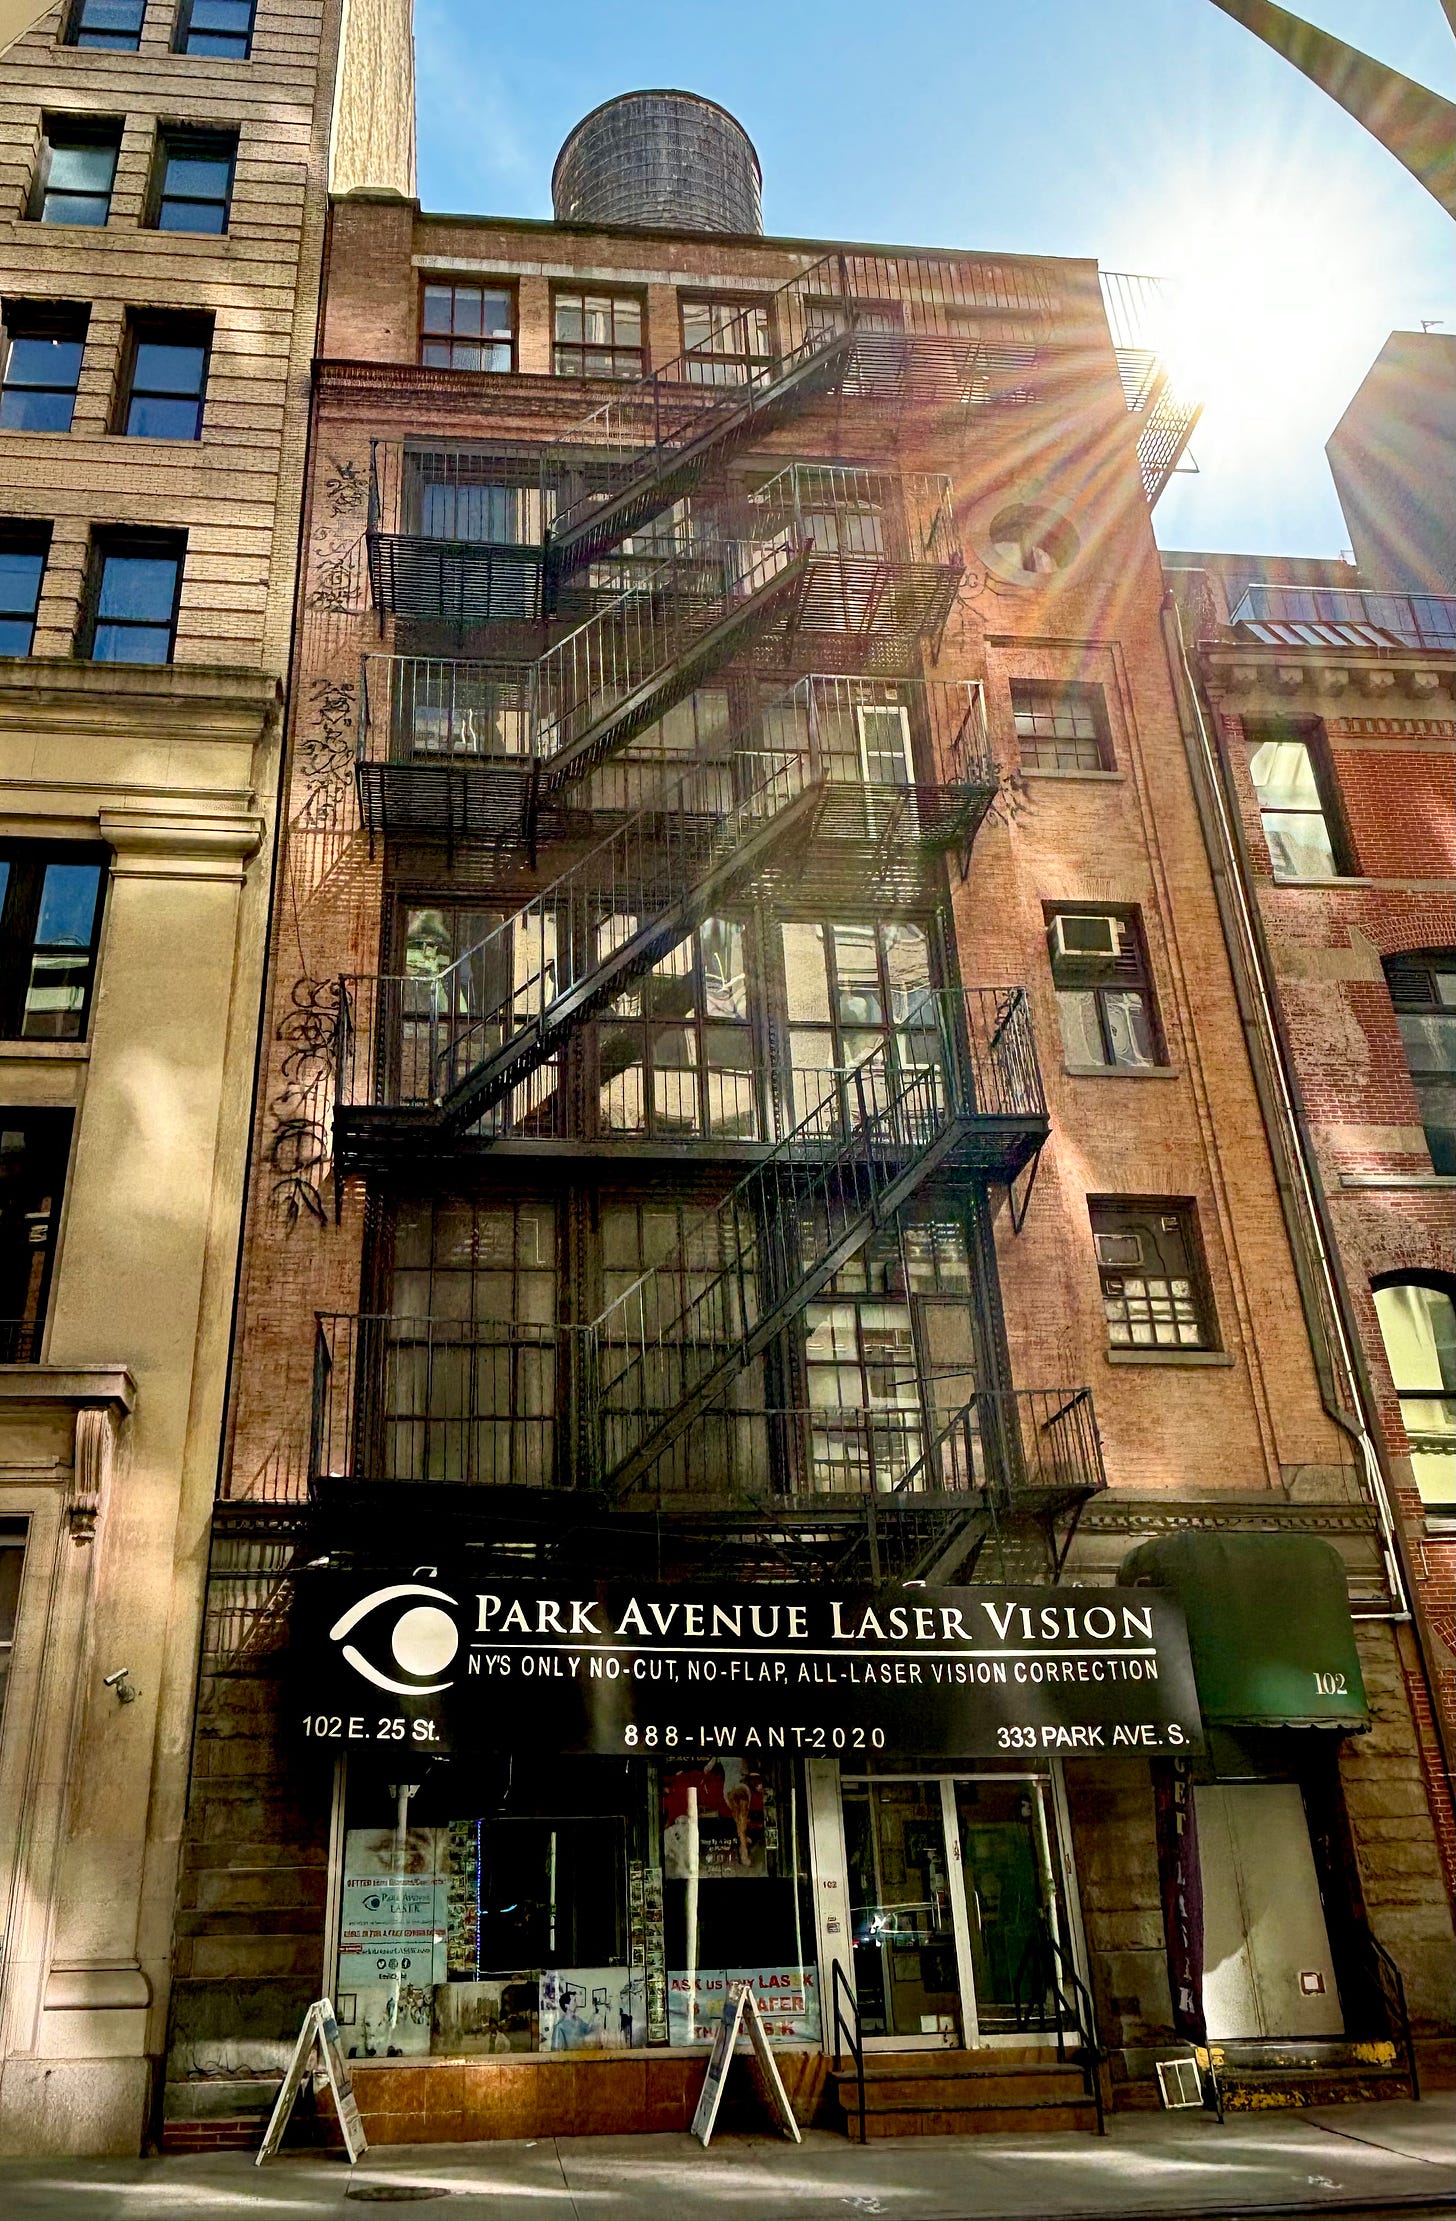 A five story brick building. There is graffiti running down the left side of the windows. On the second highest floor, there is a round window. The storefront has a black awning reading Park Avenue Laser Vision. NY'S Only No-Cut, No-Flap, All-Laser Vision Correction. The sun is blaring from the upper right corner and the rays are visible in front of the brick facade.